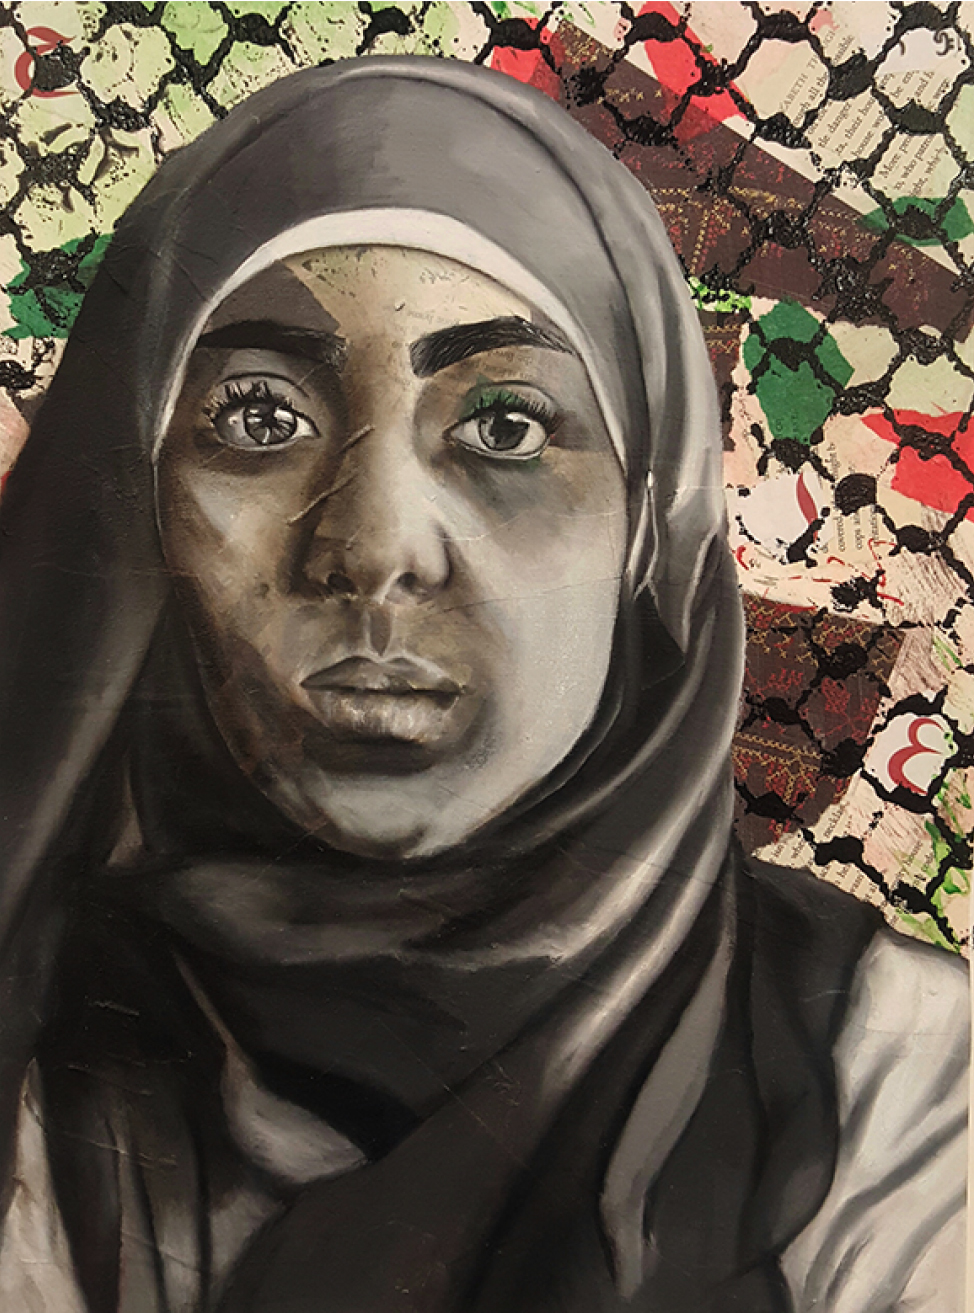 Black and white self portrait of a young woman in a head covering in front of a red, white, and green patterned background